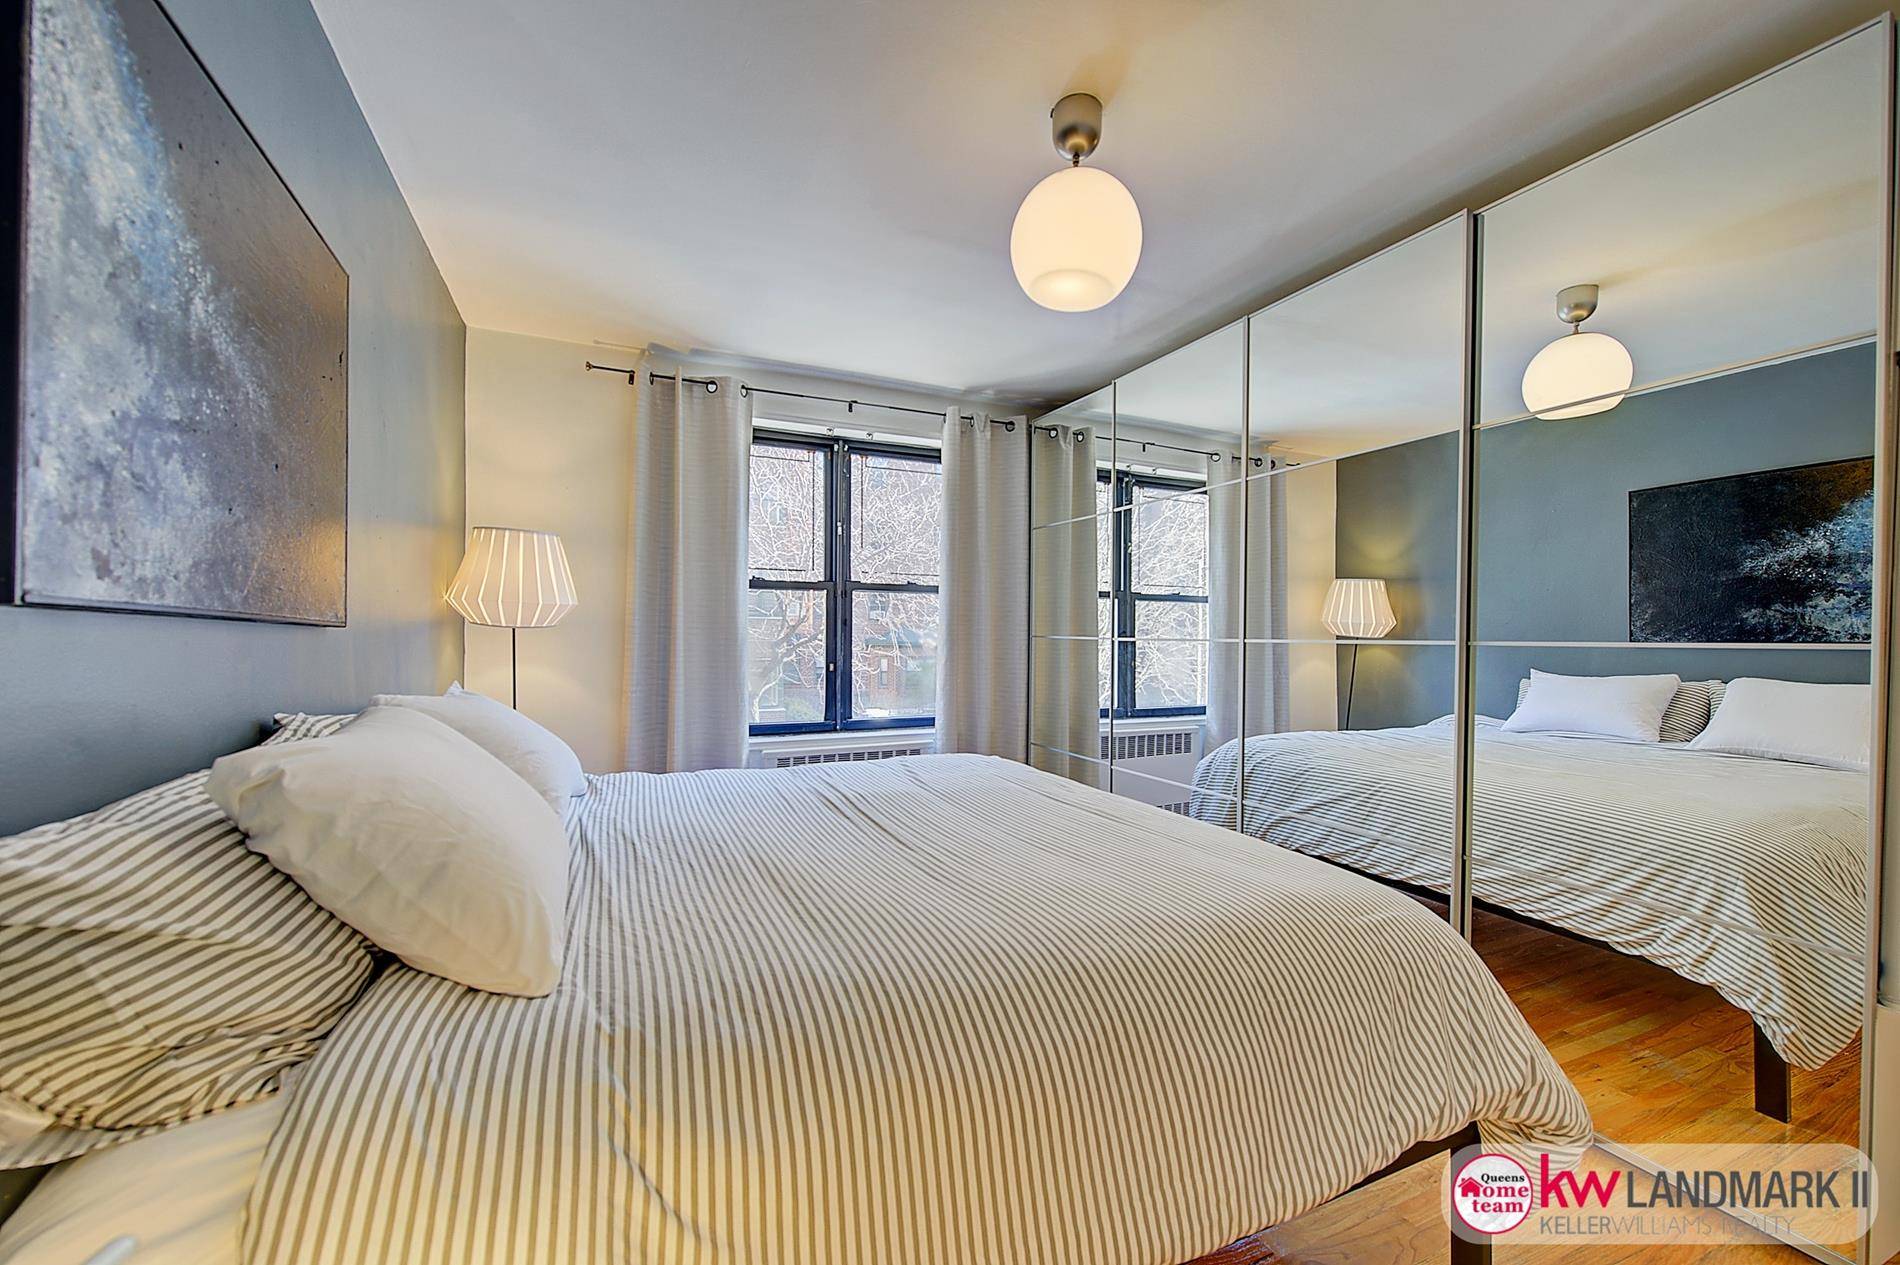 Rare 2 Bedroom Sale at The Amherst in Historic Jackson Heights.